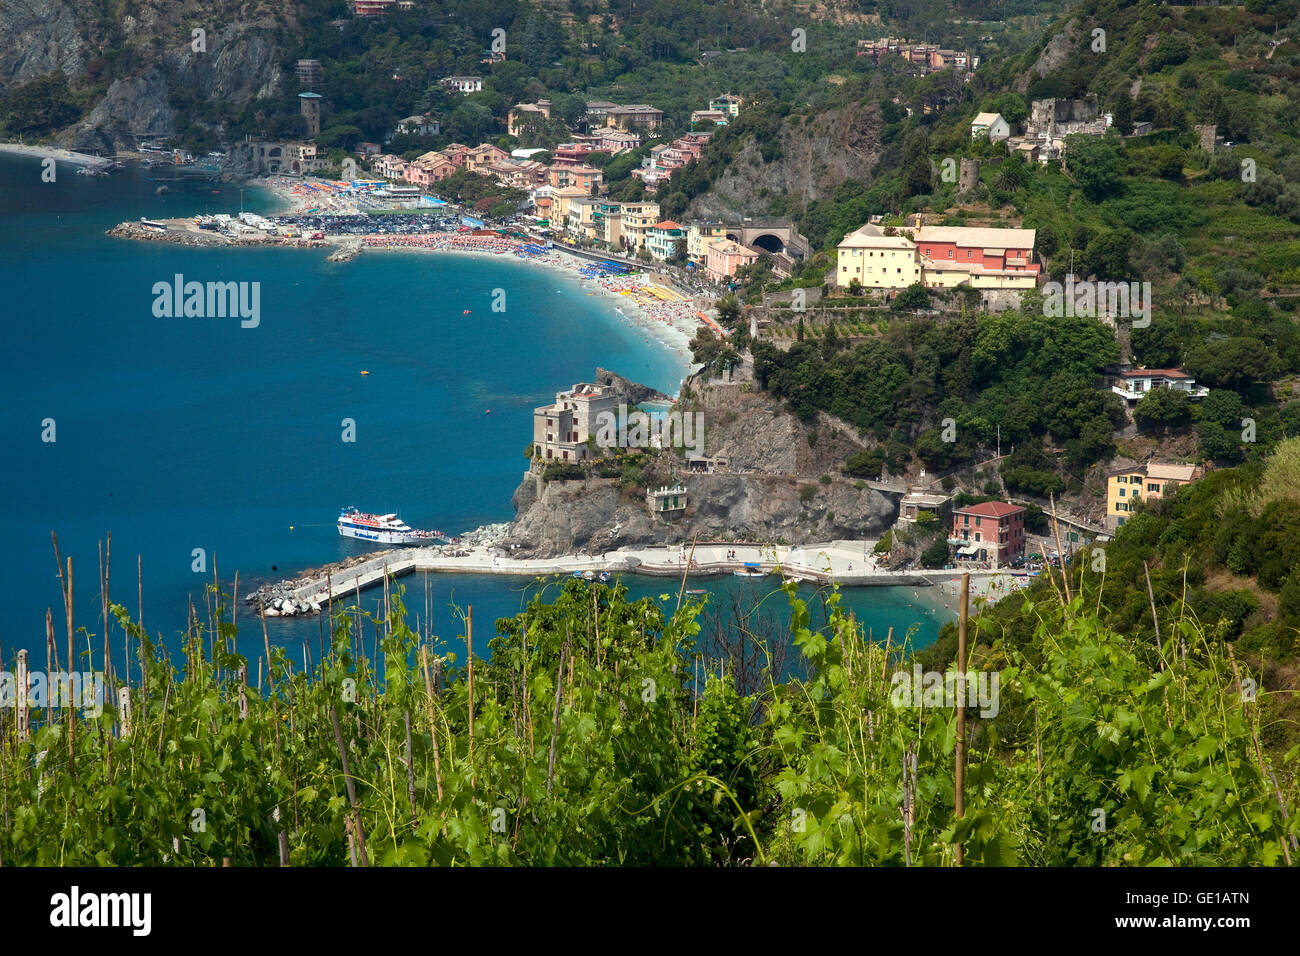 A vineyard grows on a hillside overlooking the Cinque Terre resort town of Monterosso, Italy. The five hillside coastal towns kn Stock Photo